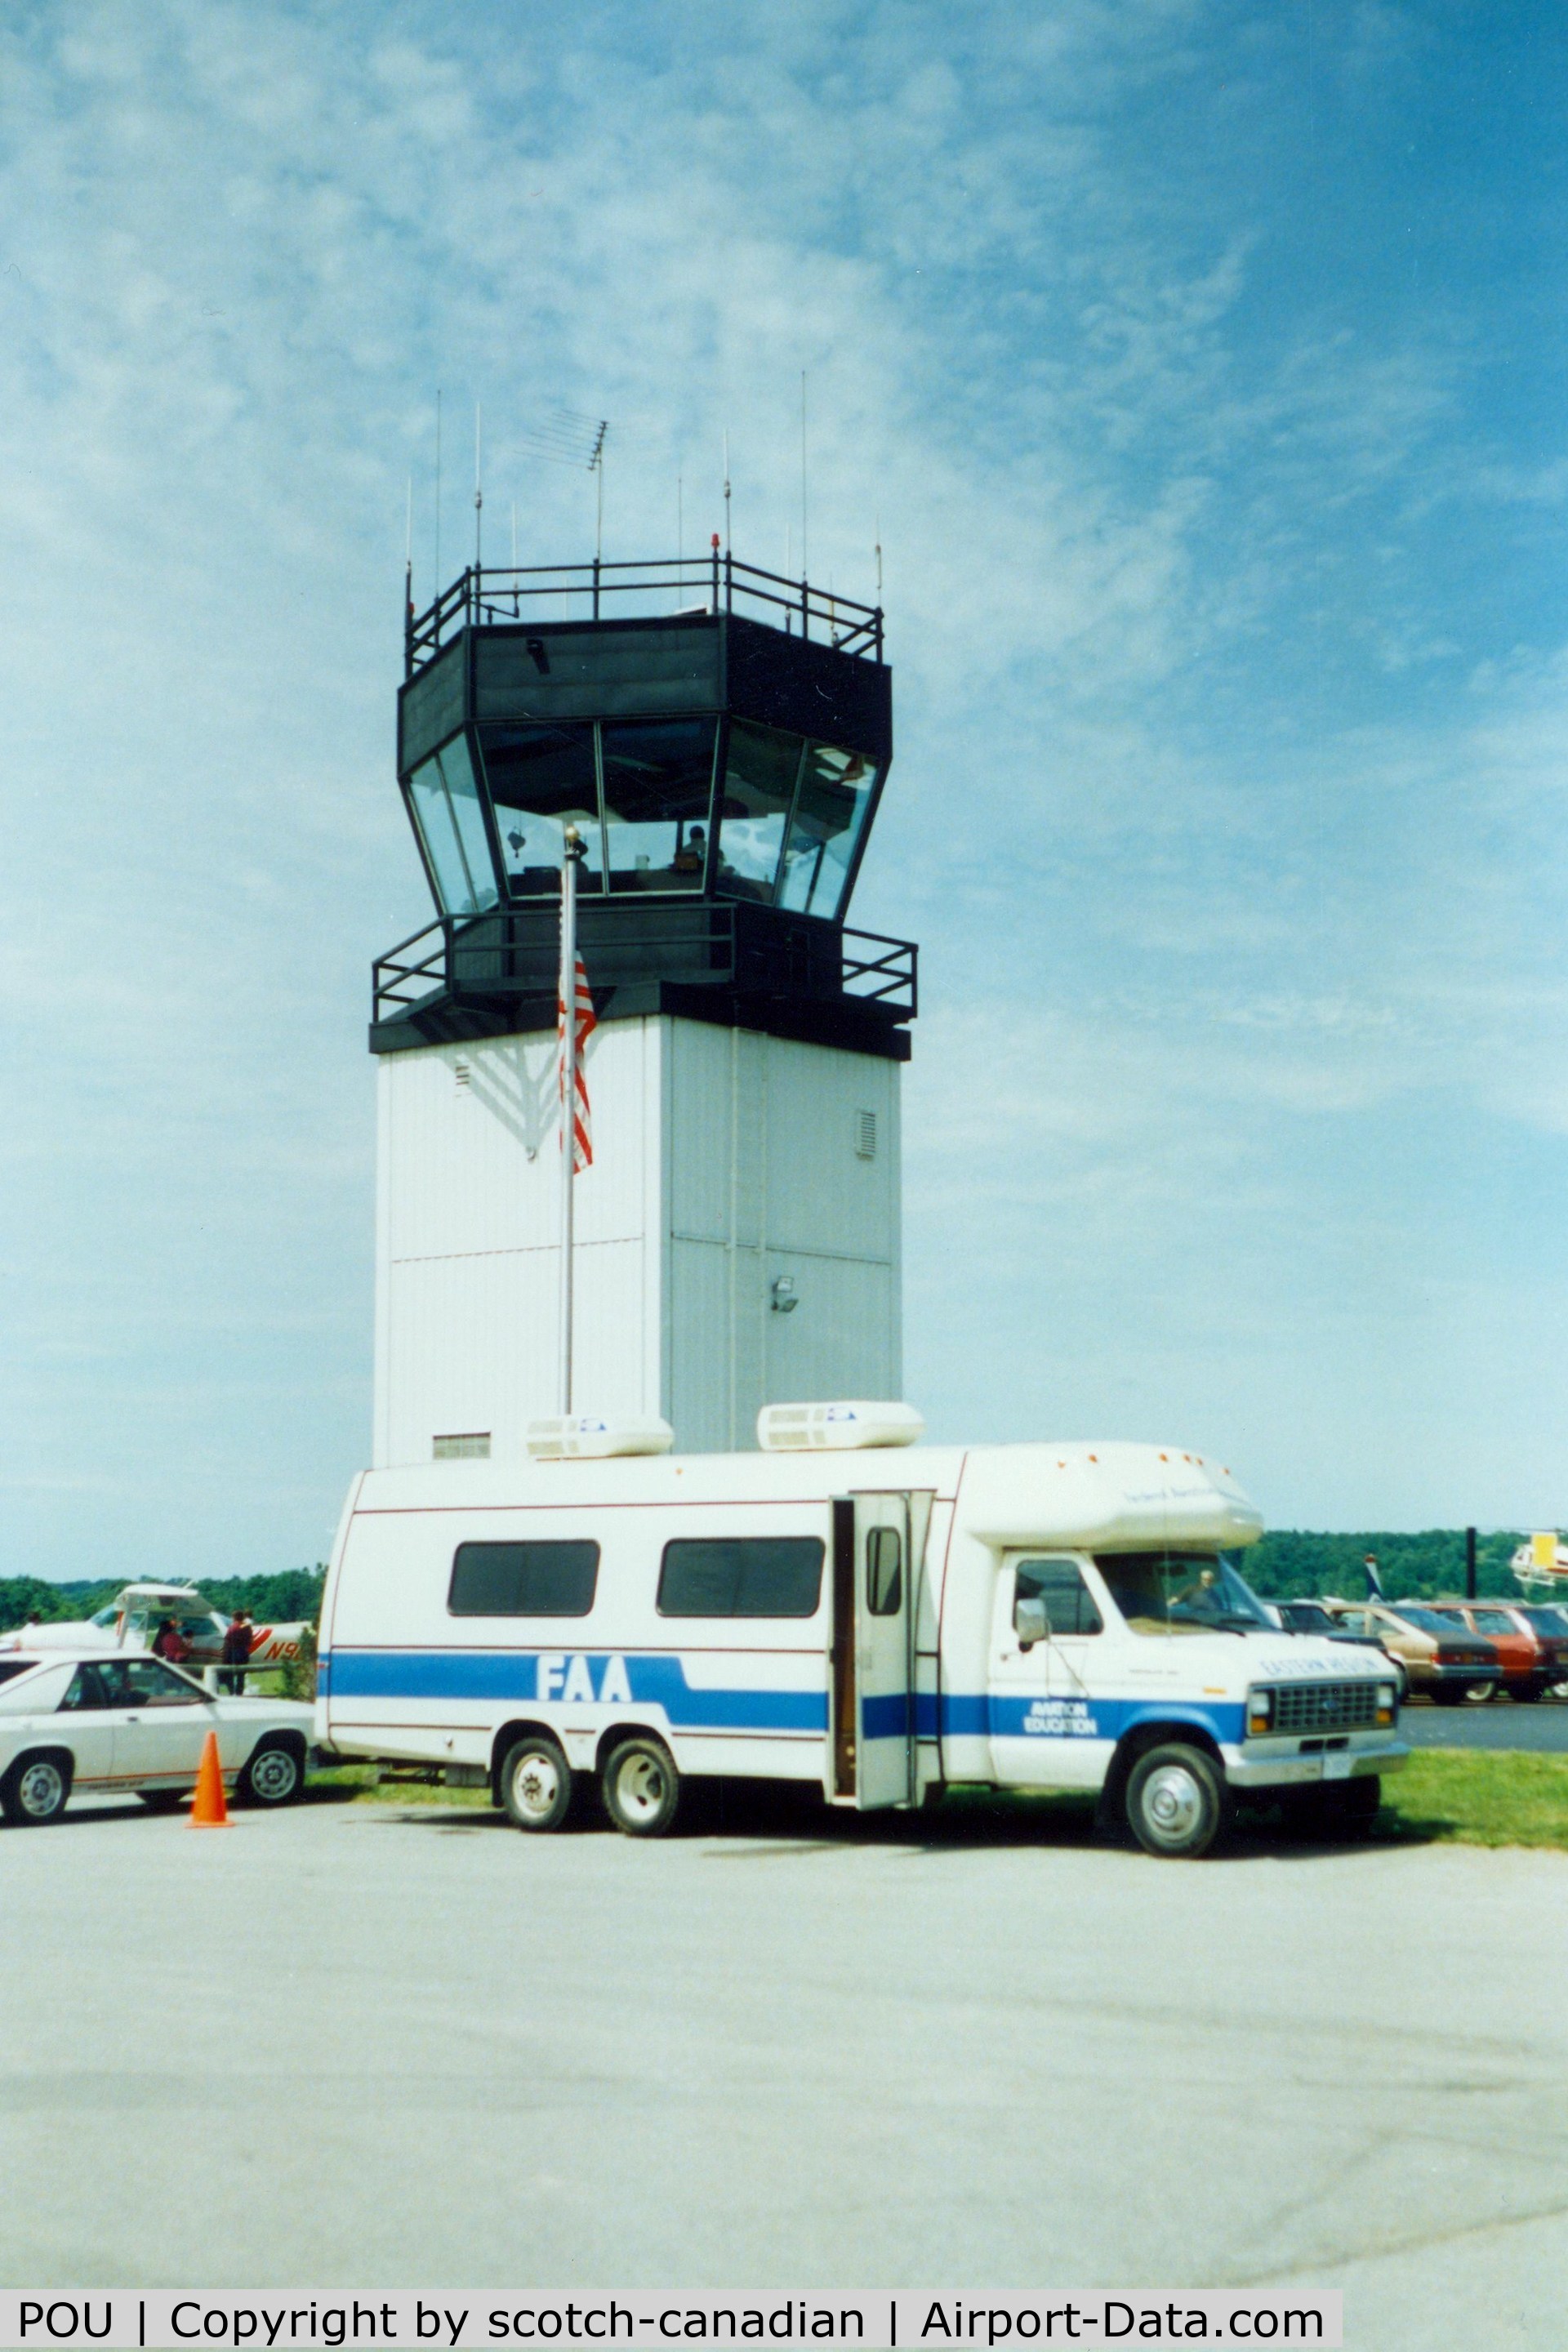 Dutchess County Airport (POU) - FAA Aviation Education Van and Airport Control Tower at at Dutchess County Airport, Poughkeepsie, NY - circa 1980's